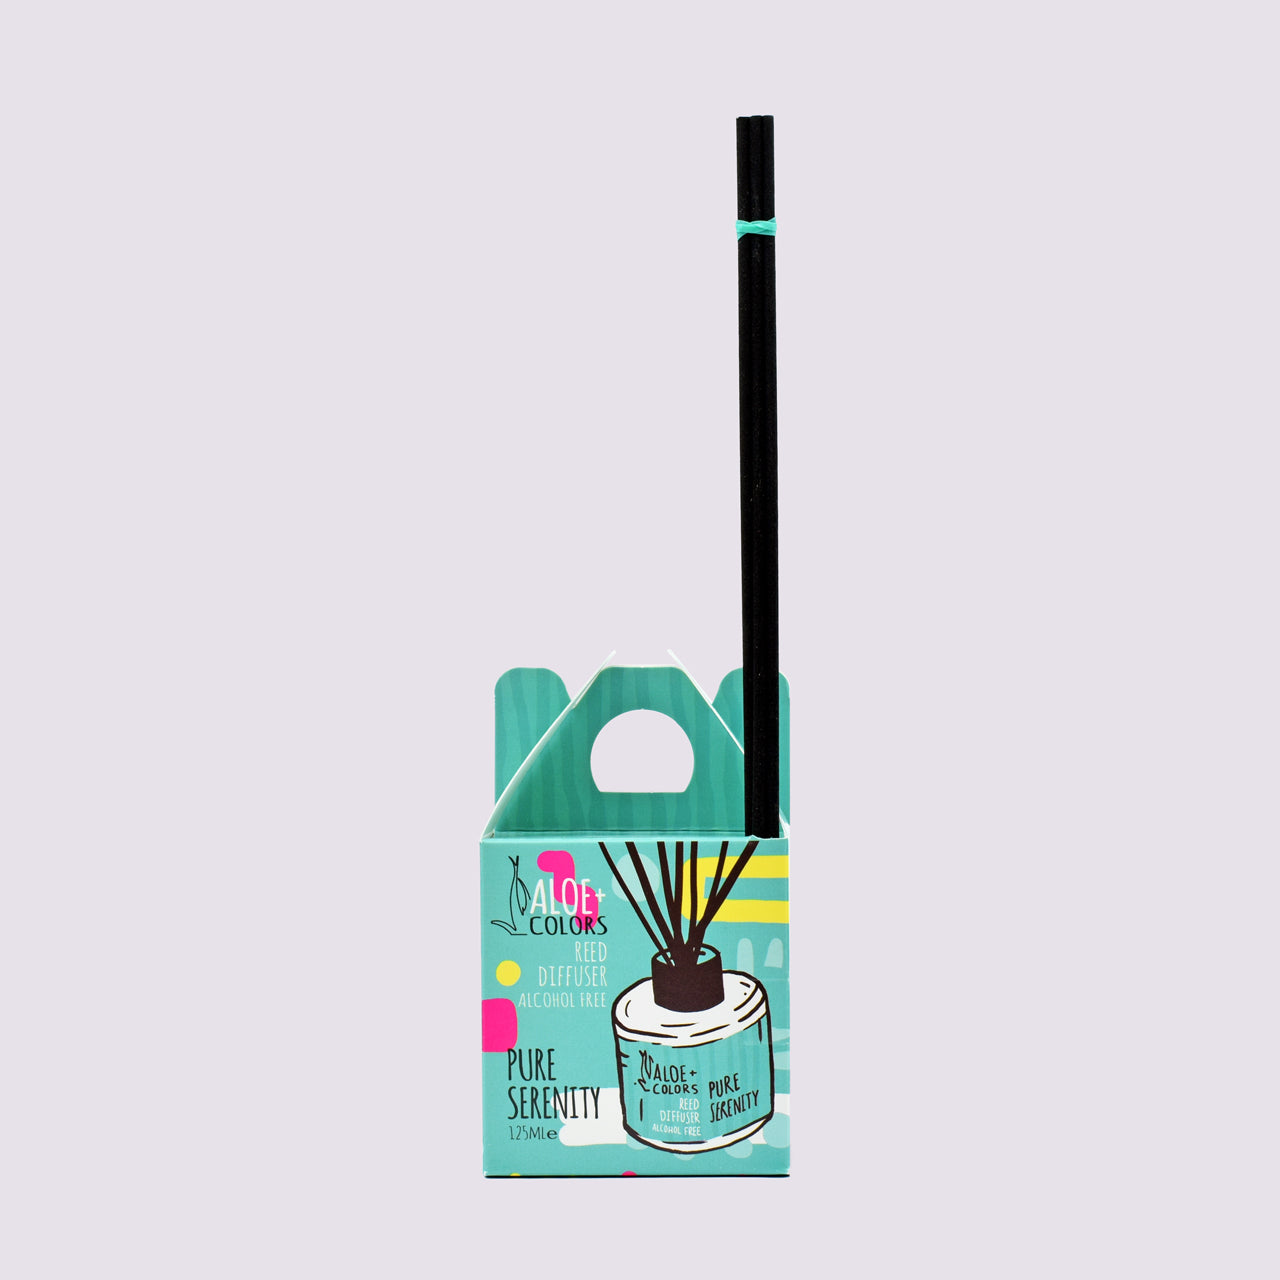 Pure Serenity Reed Diffuser Set